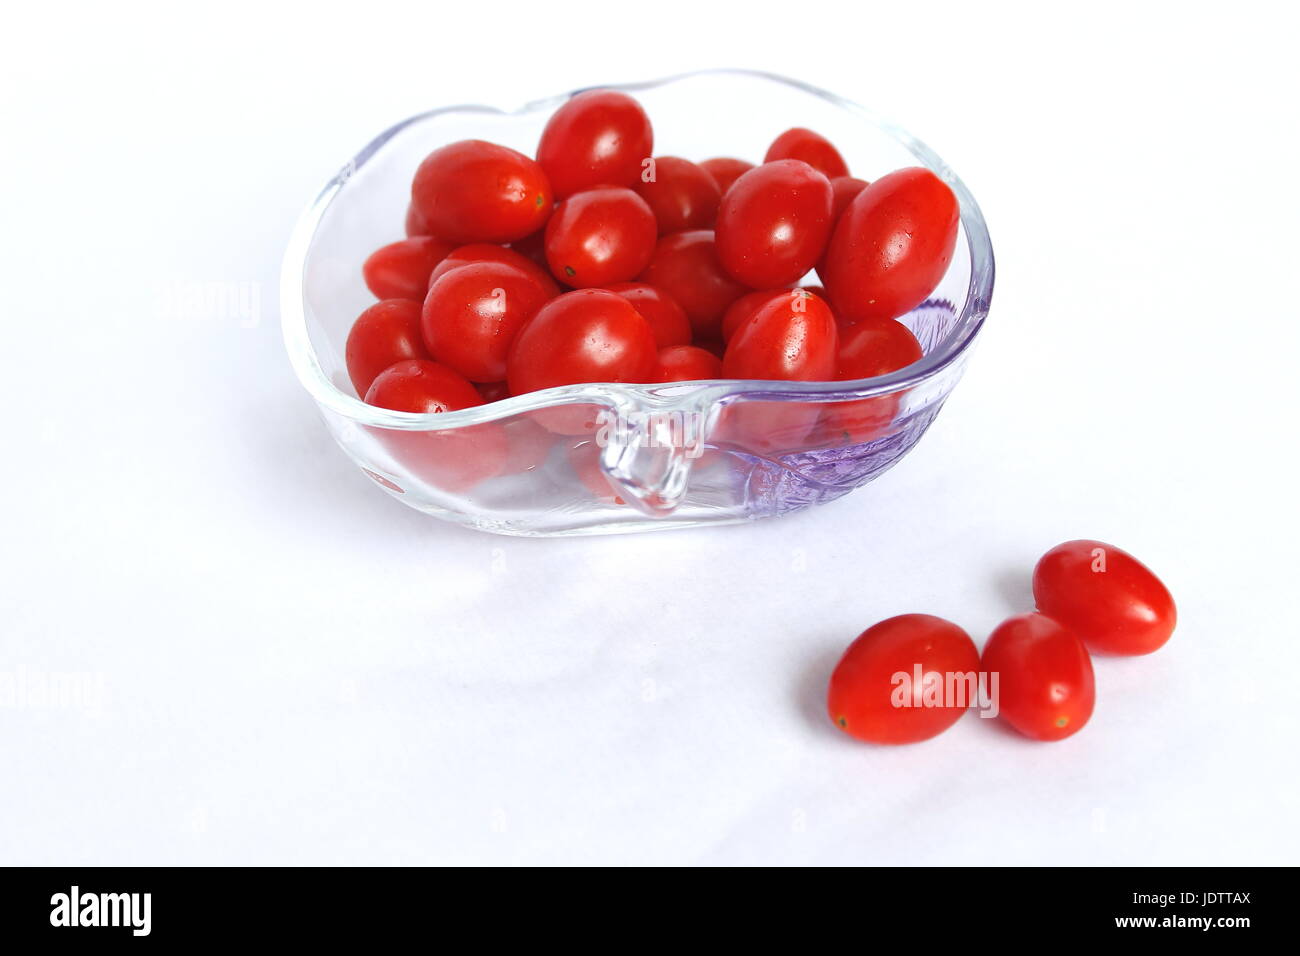 Small cherry tomatoes long red and fresh in a cup Stock Photo